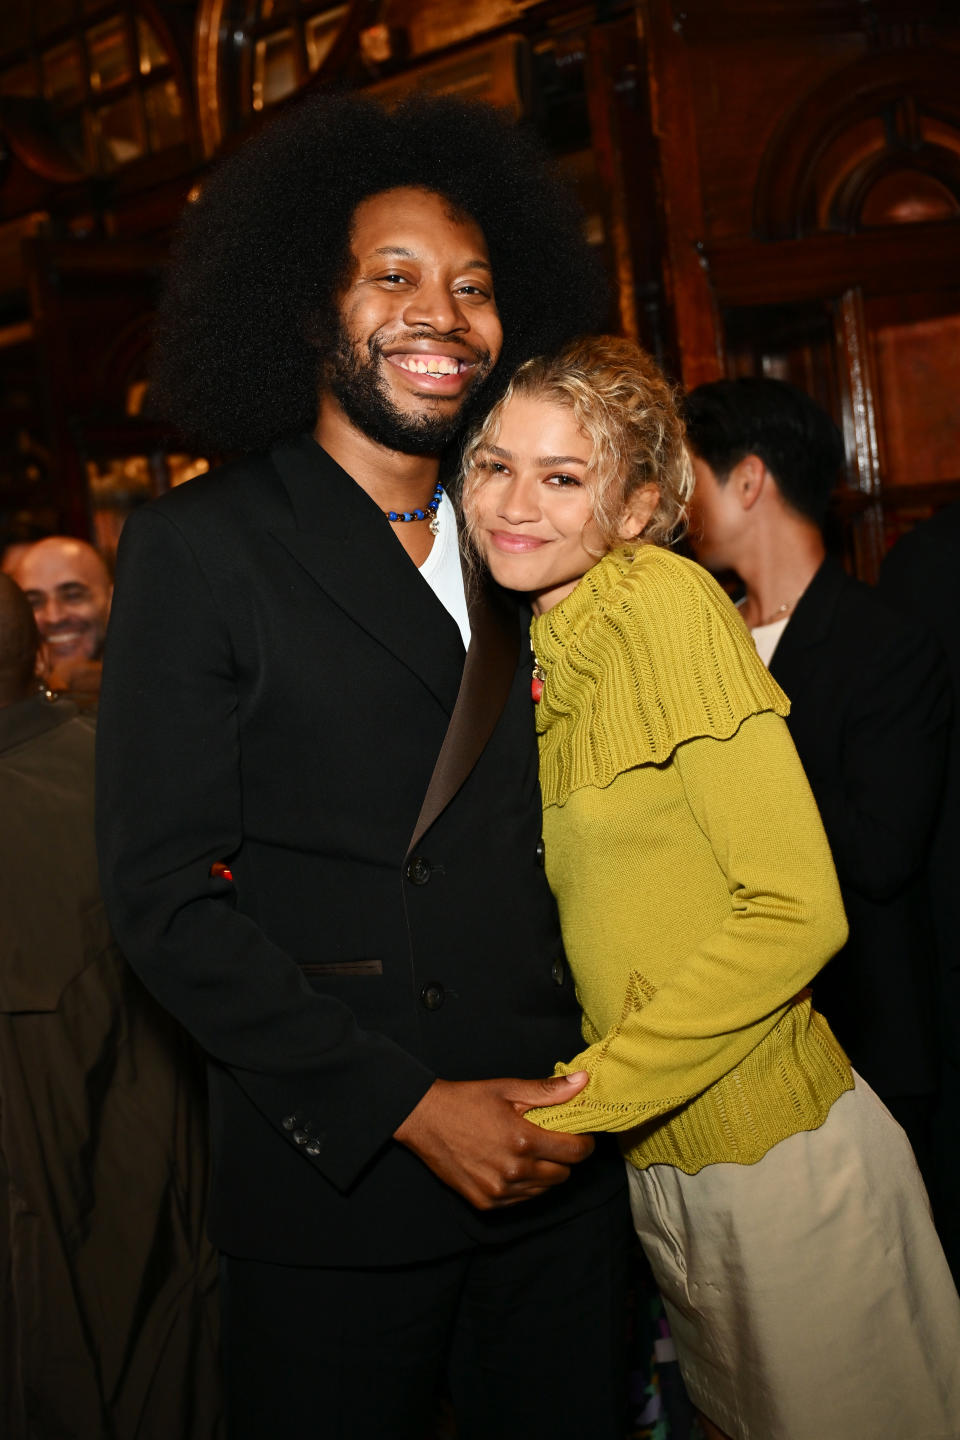 LONDON, ENGLAND - JULY 10: Playwright Jeremy O. Harris and Zendaya pose in the foyer following the press night performance of "Slave Play" at the Noel Coward Theatre on July 10, 2024 in London, England. (Photo by Jed Cullen/Dave Benett/Getty Images)